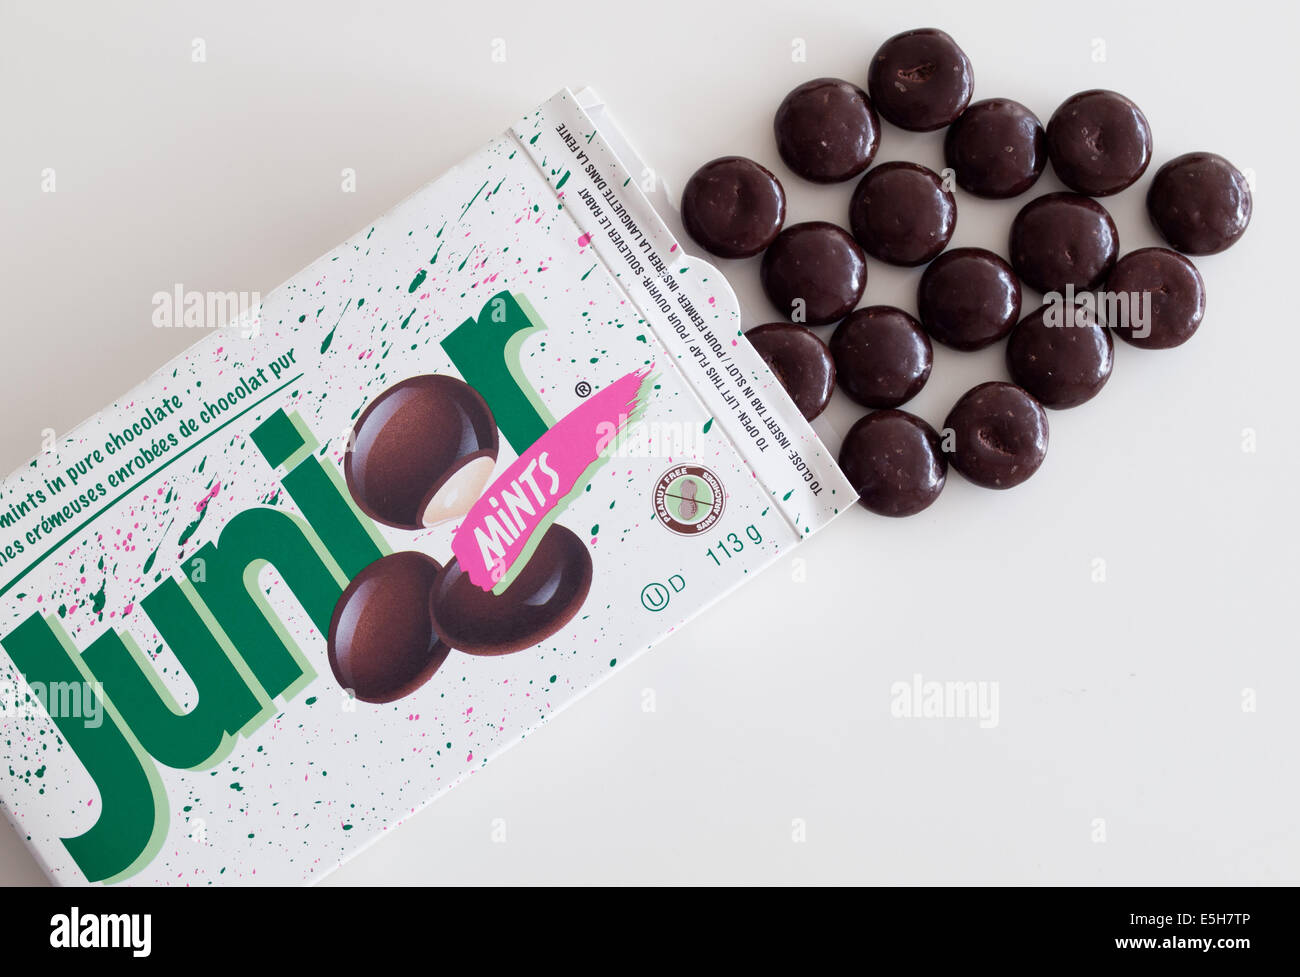 A box of Junior Mints candy. Stock Photo